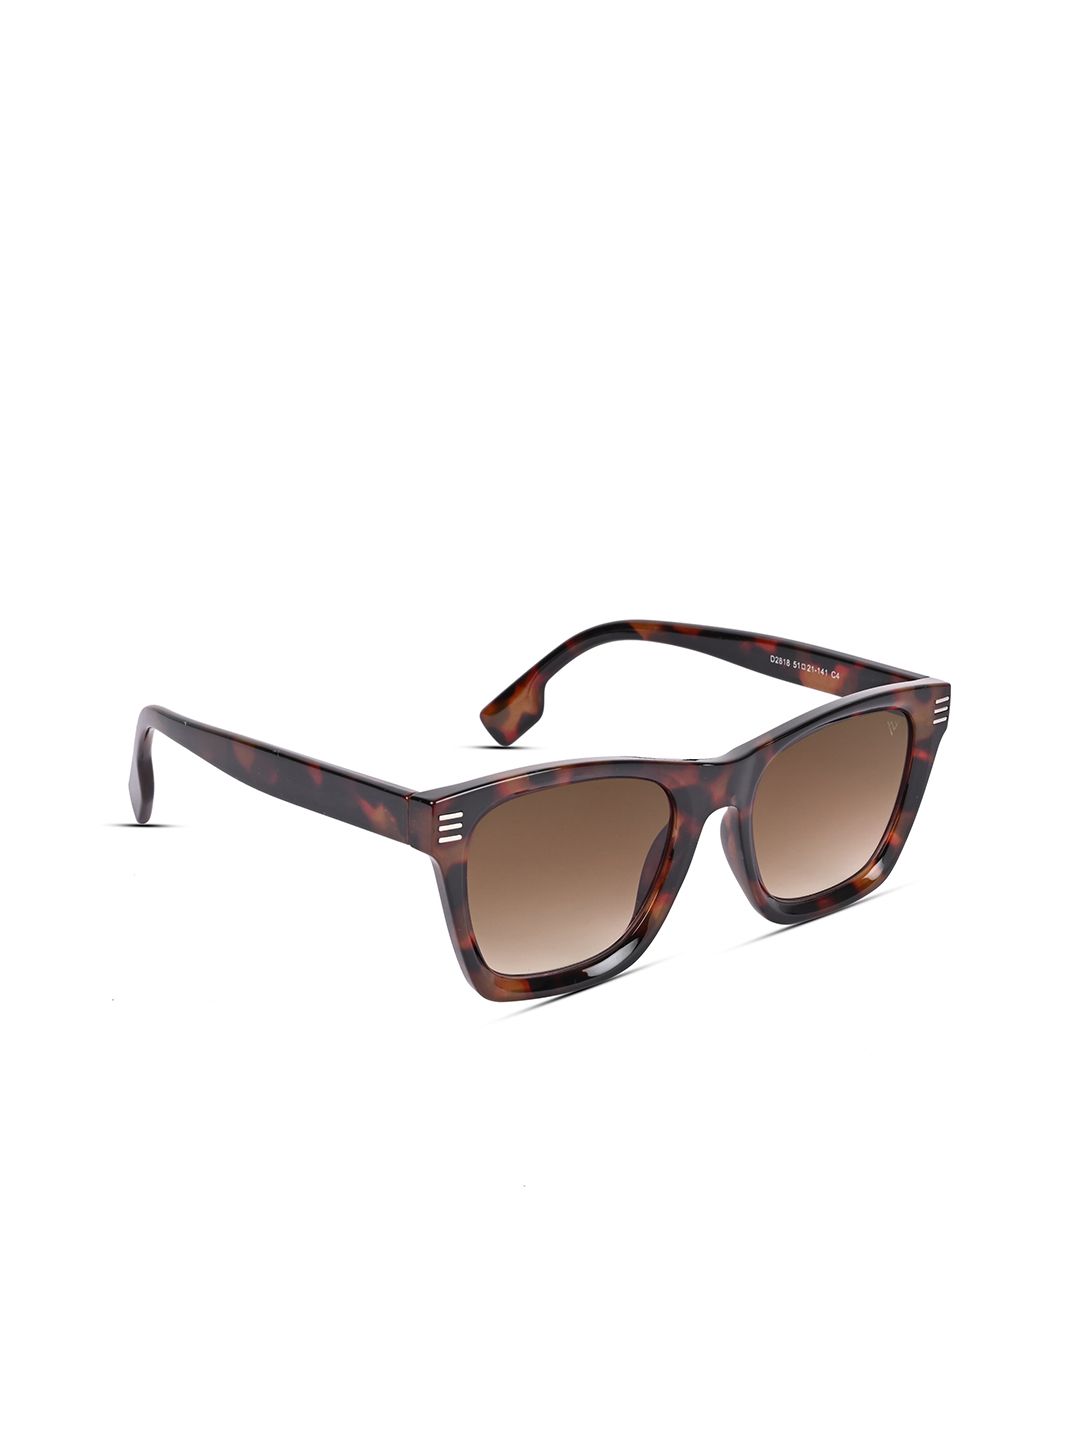 Voyage Unisex Brown Lens & Brown Wayfarer Sunglasses with UV Protected Lens Price in India